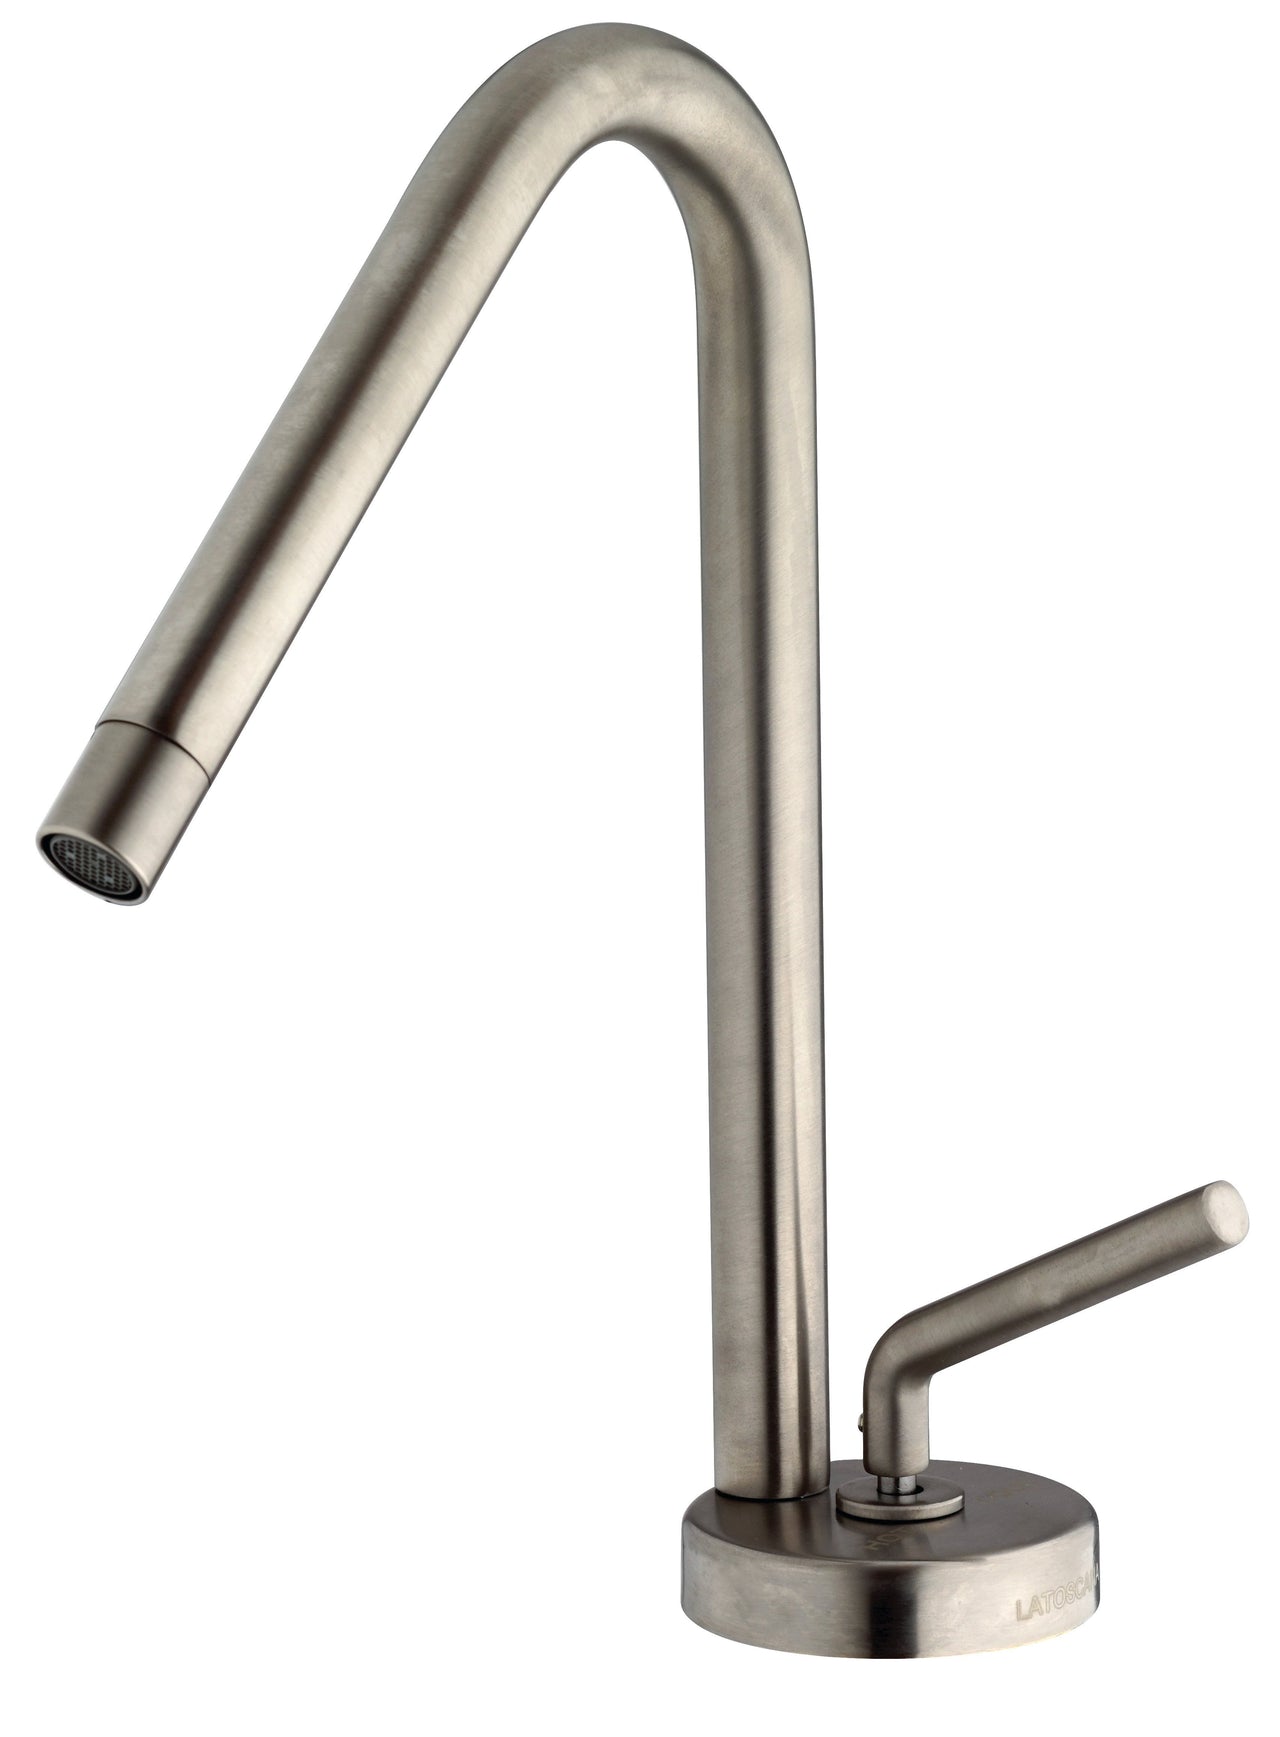 Latoscana Morellino Single Lever Handle Faucet In Rotating Spout Brushed Nickel touch on bathroom sink faucets Latoscana 